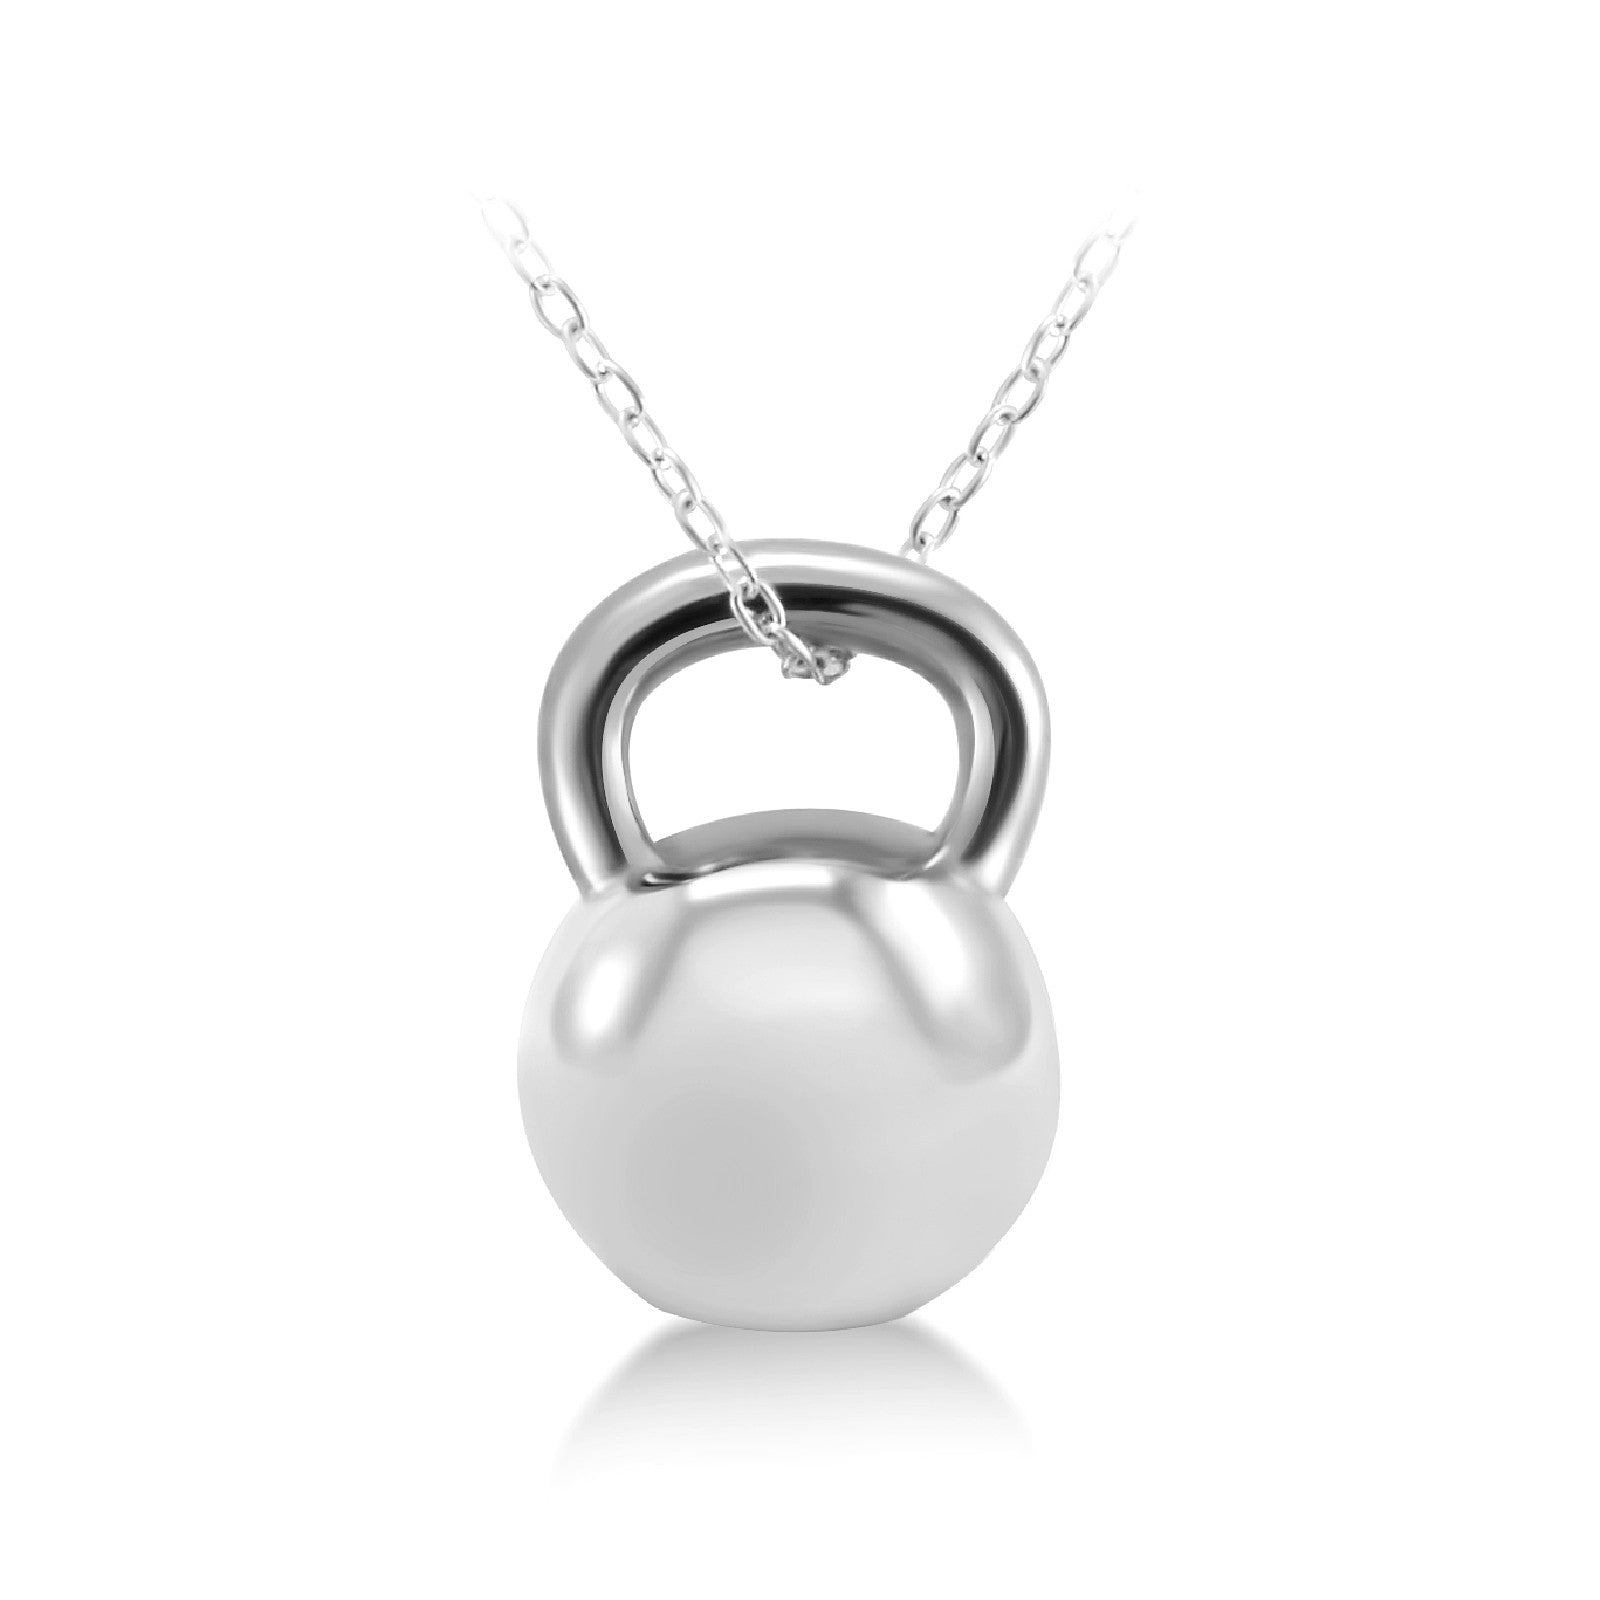 Grand Kettlebell Necklace